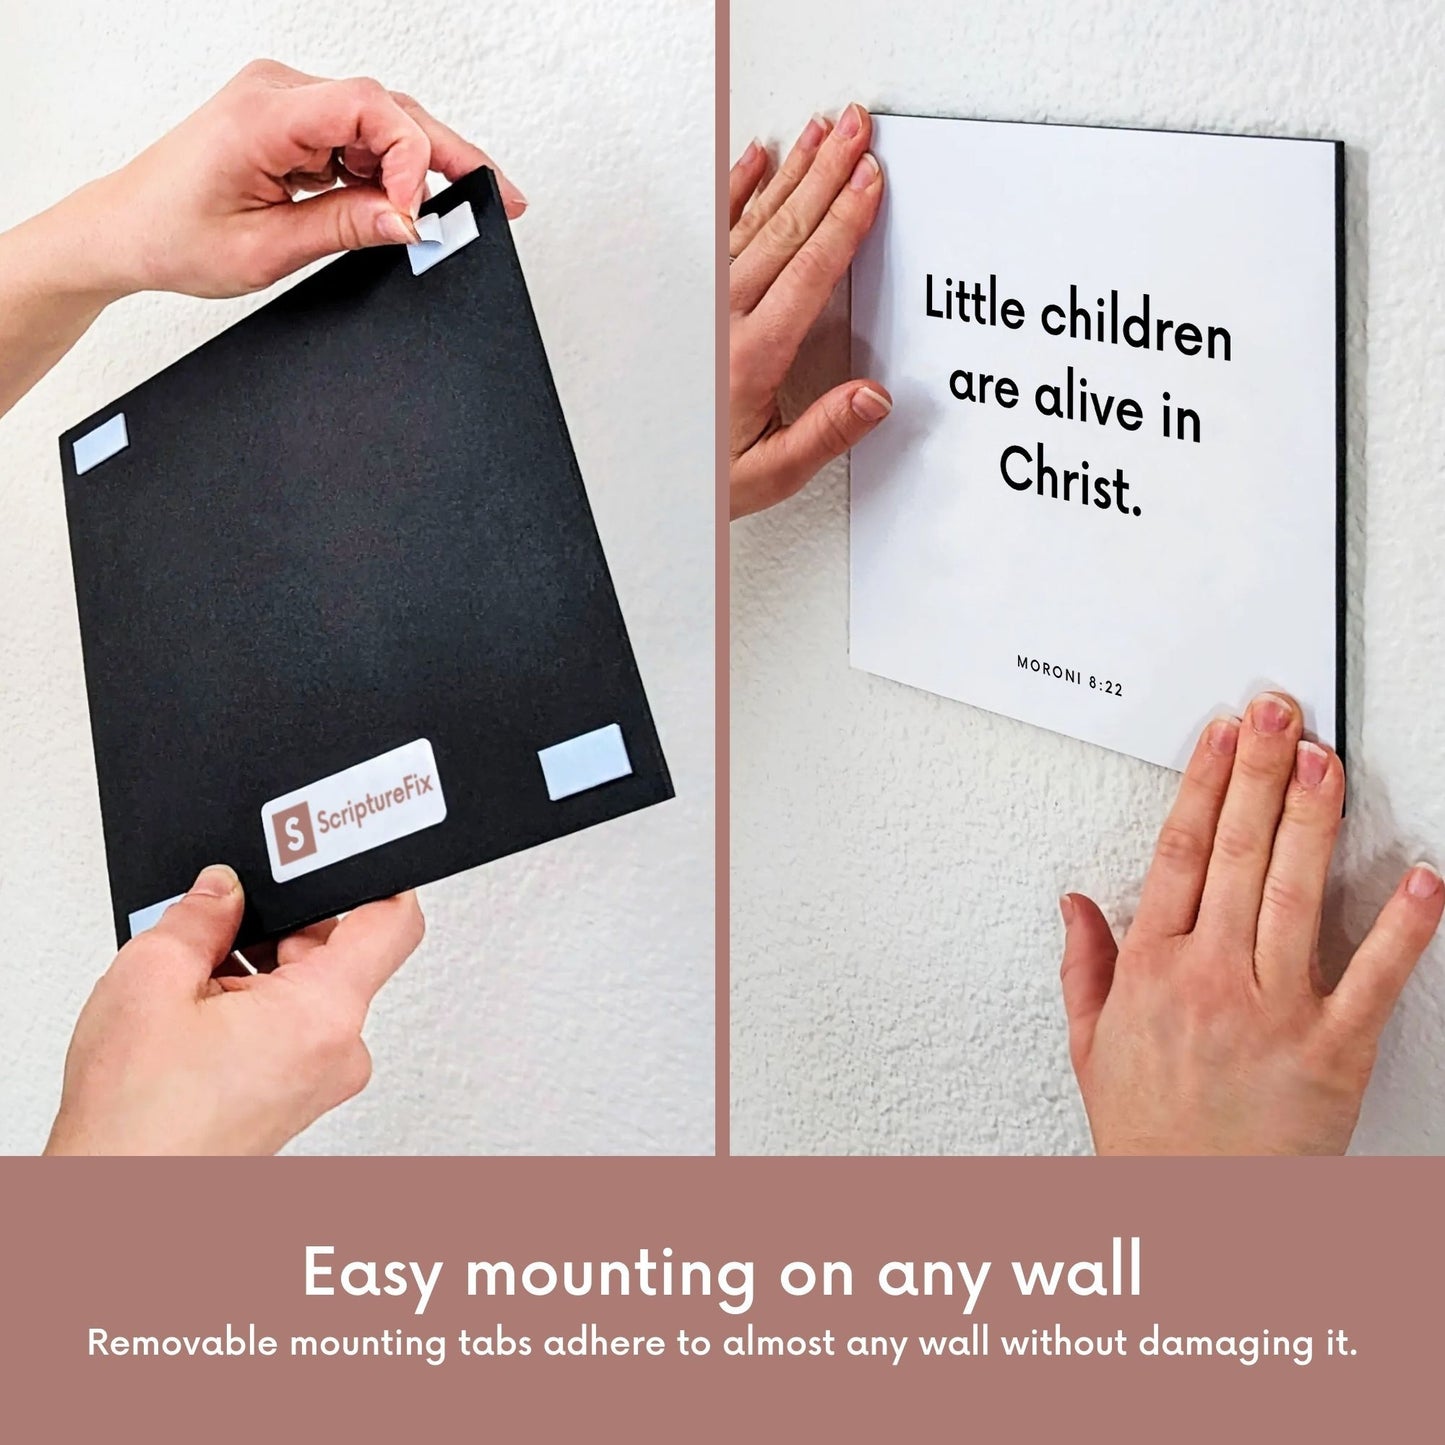 Mounting of scripture tile for Moroni 8:22 - "Little children are alive in Christ"